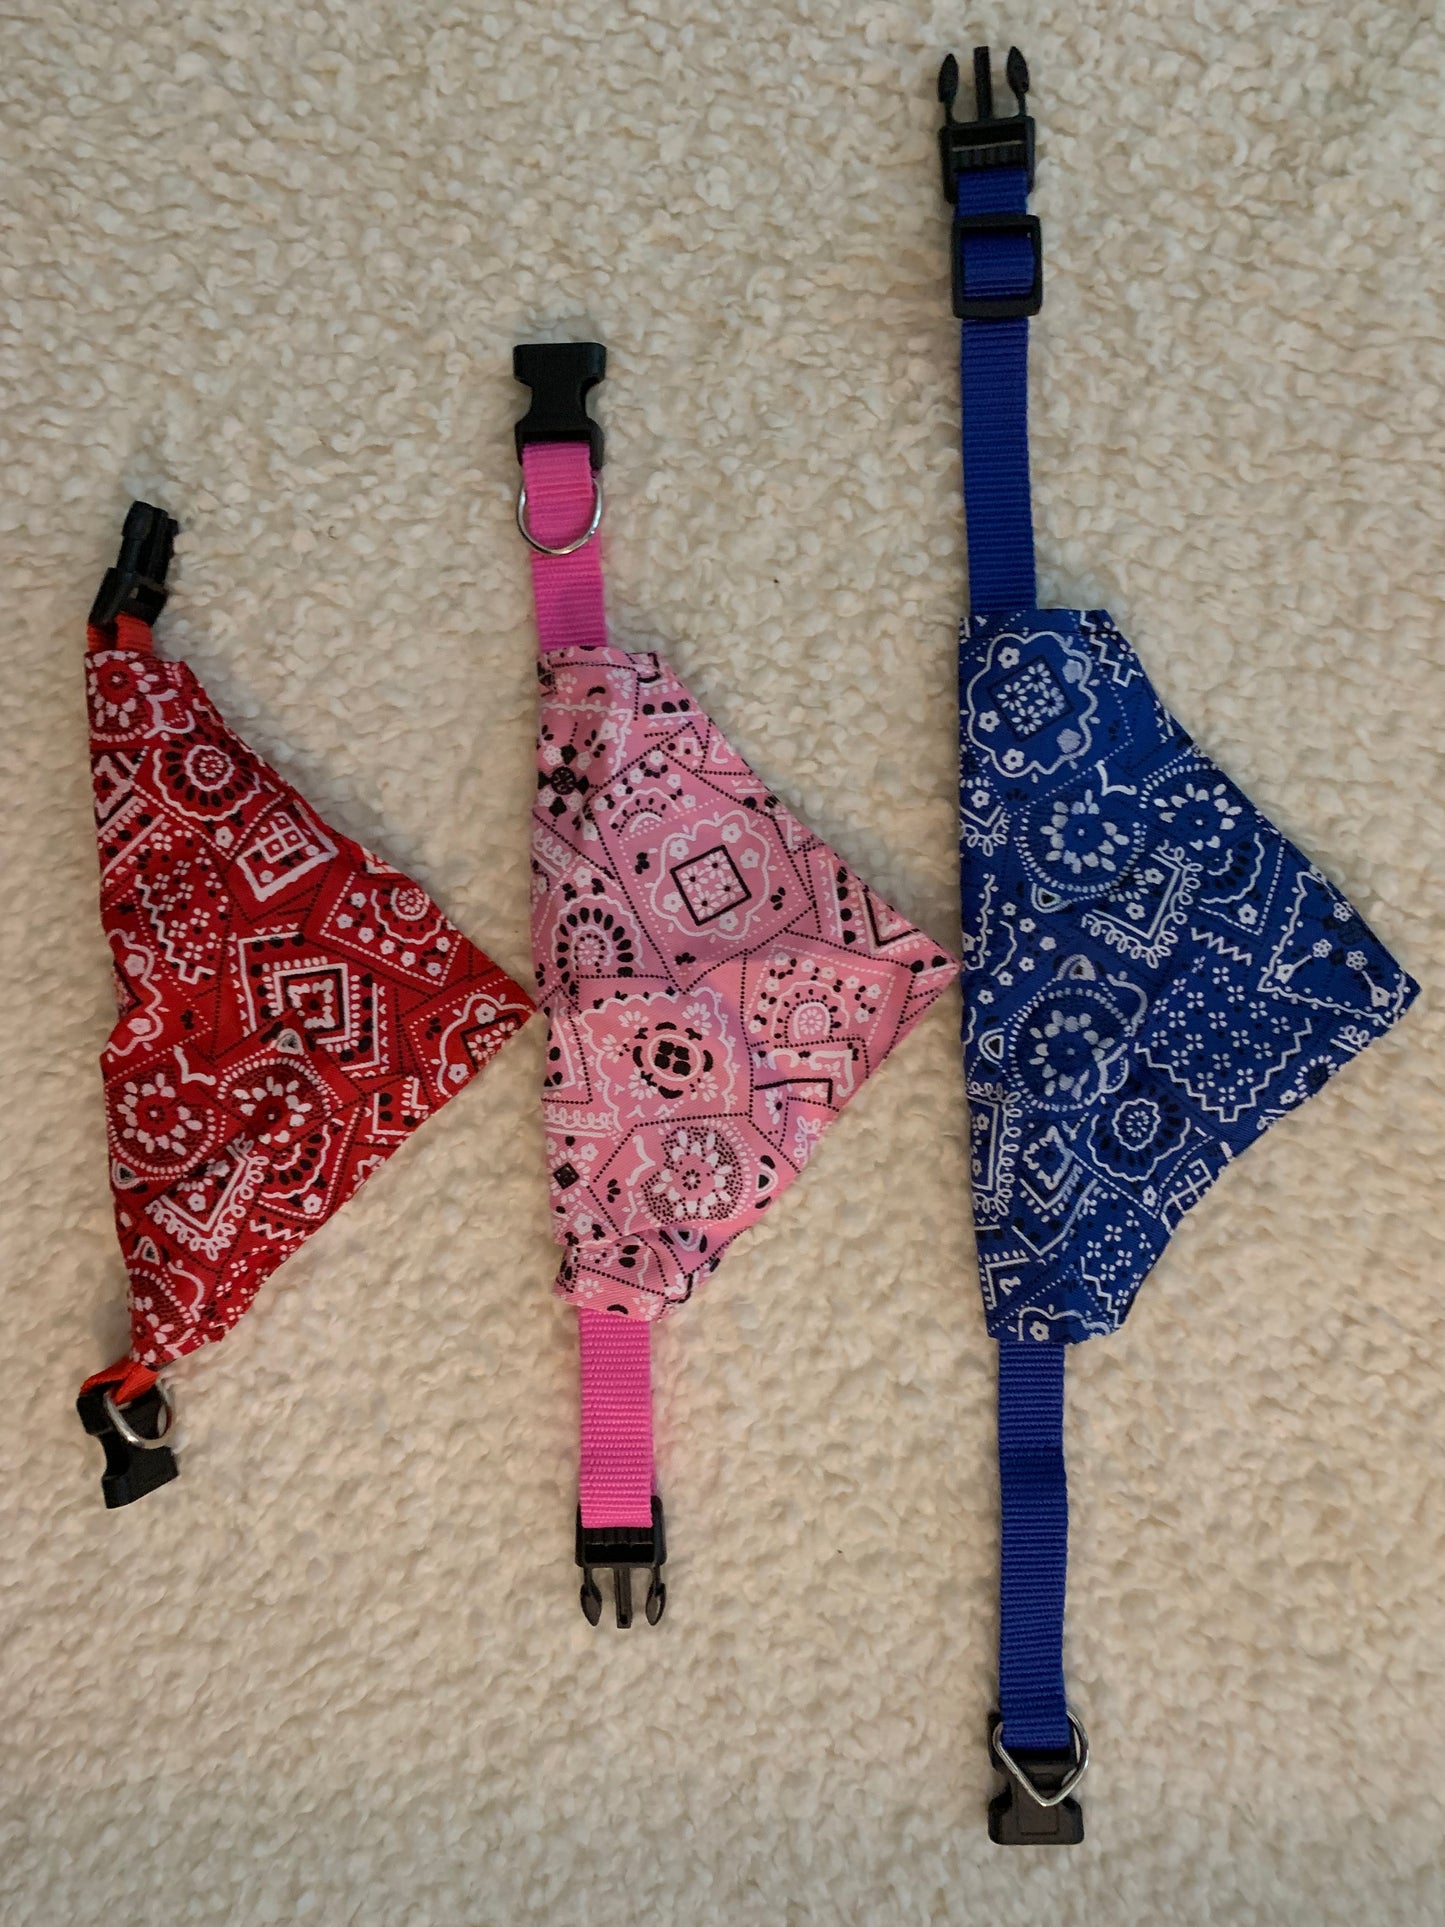 Dog / Puppy Bandana Collar Scarf - LOVE these! So easy to clip on and go!